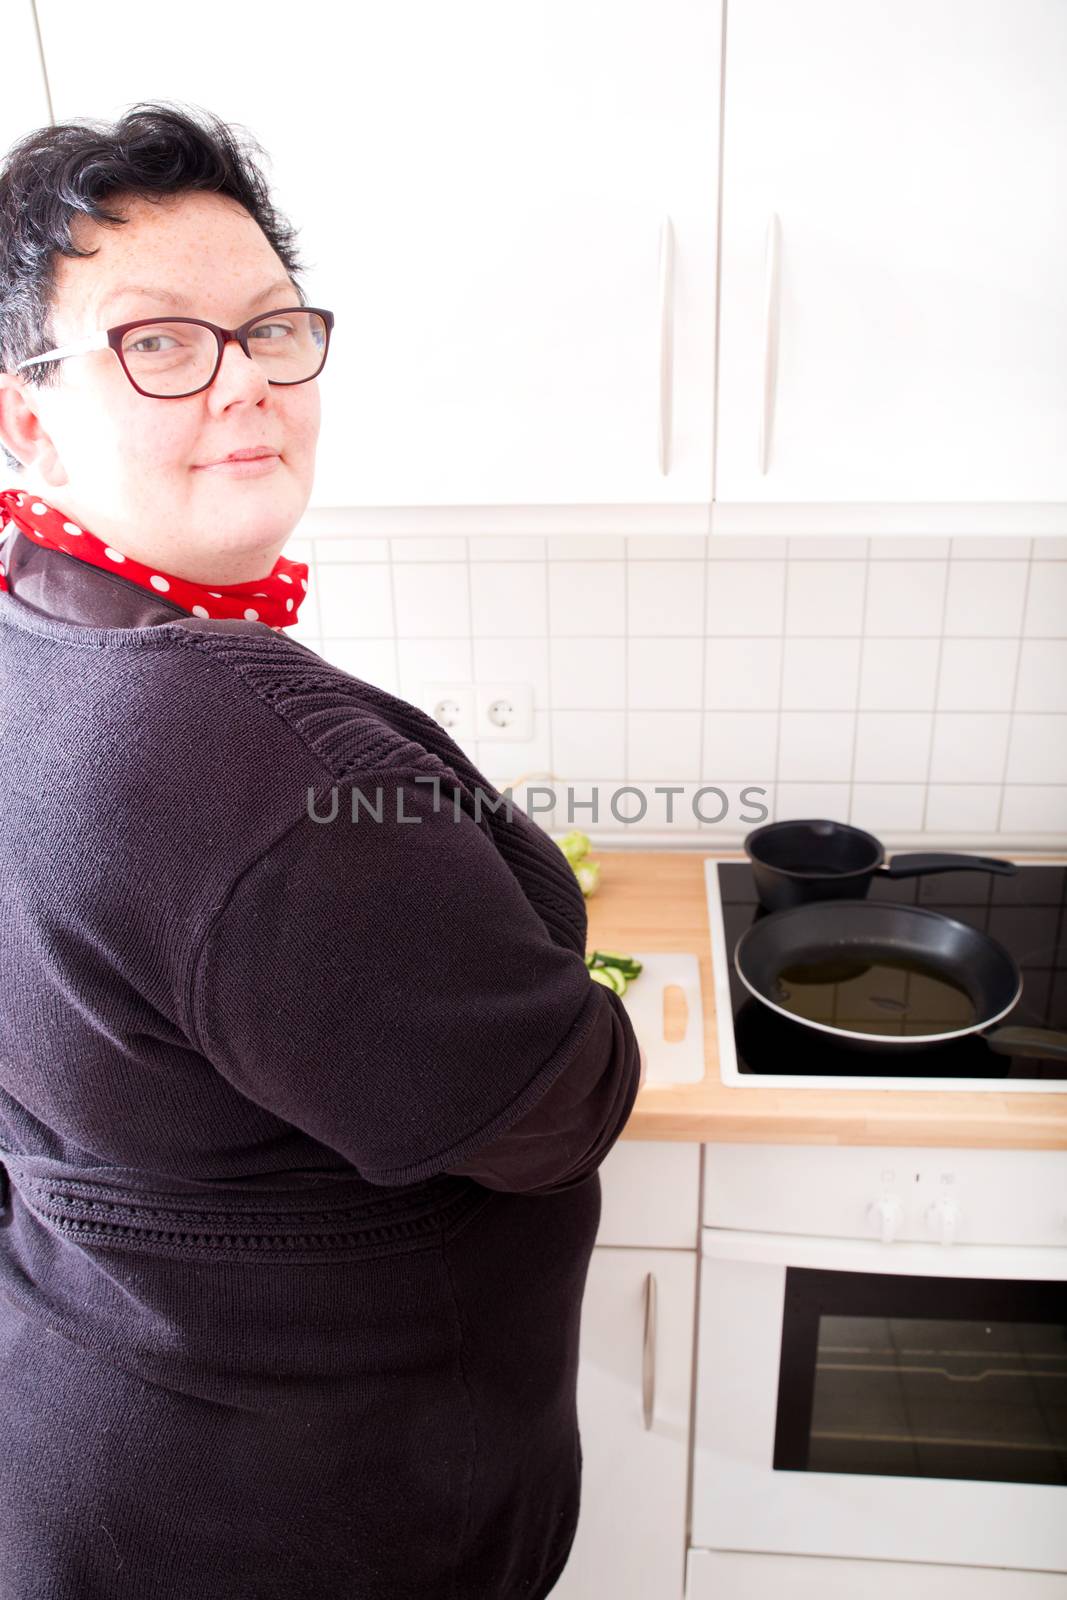 Mature overweight woman cutting cucumber in the kitchen.
